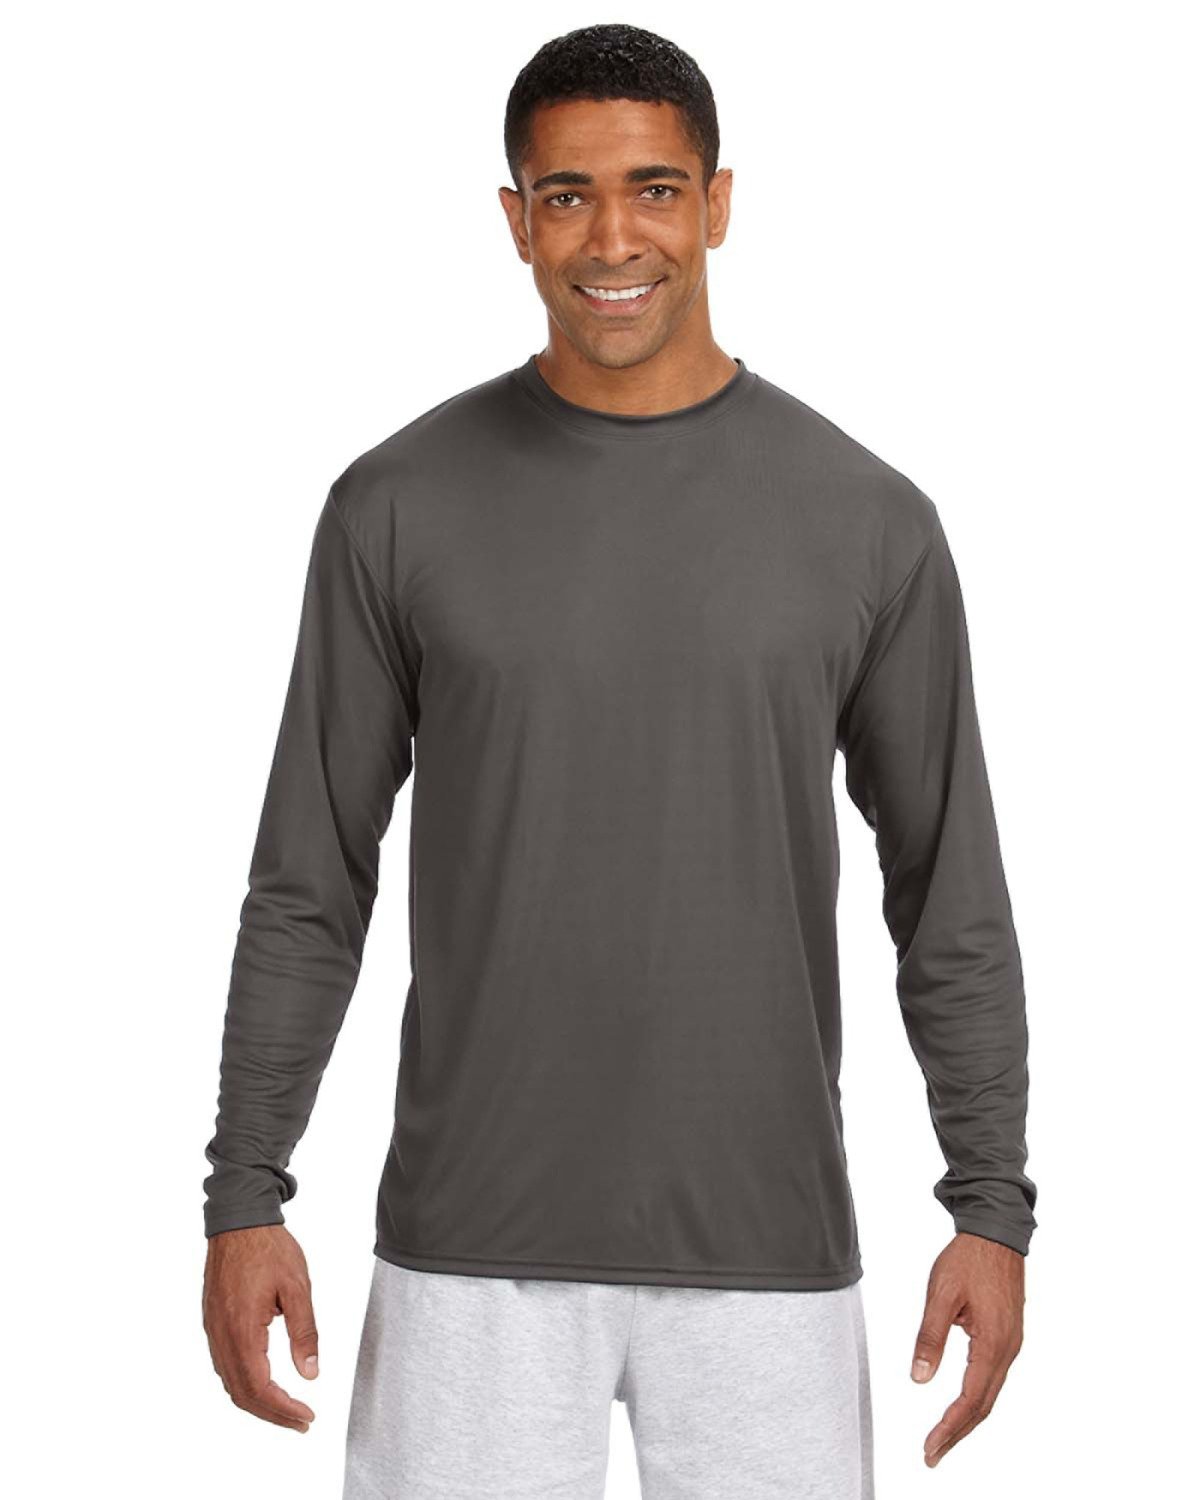 Men's Relaxed Long-Sleeve Cooling Tee, Men's Clearance